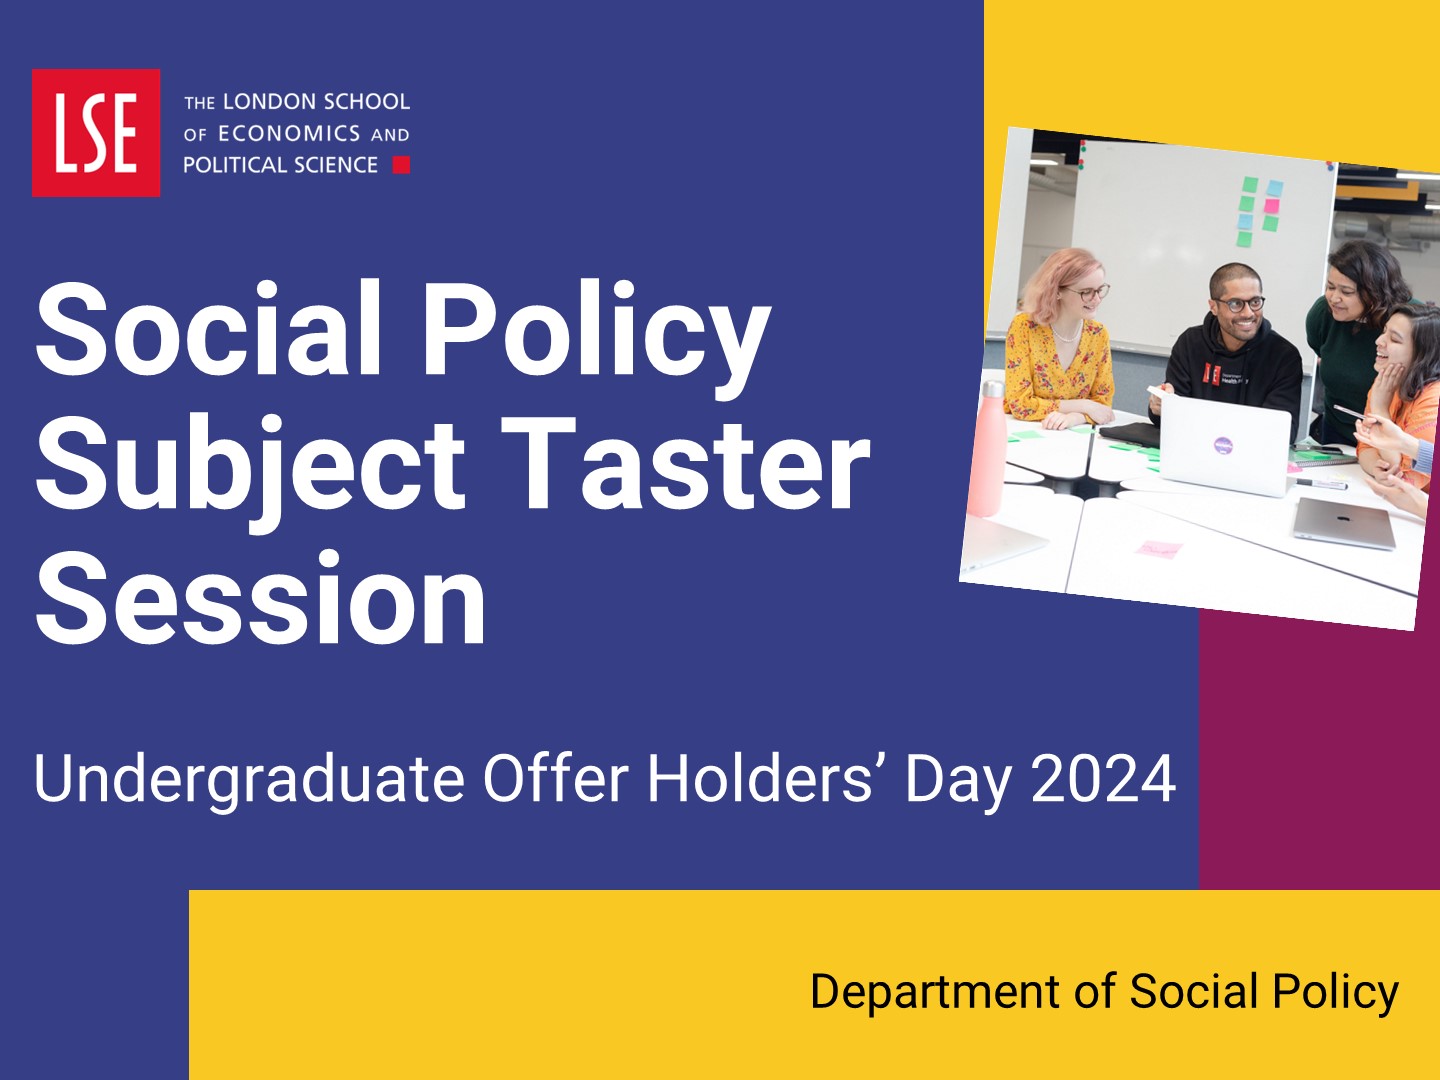 Watch the social policy subject taster session